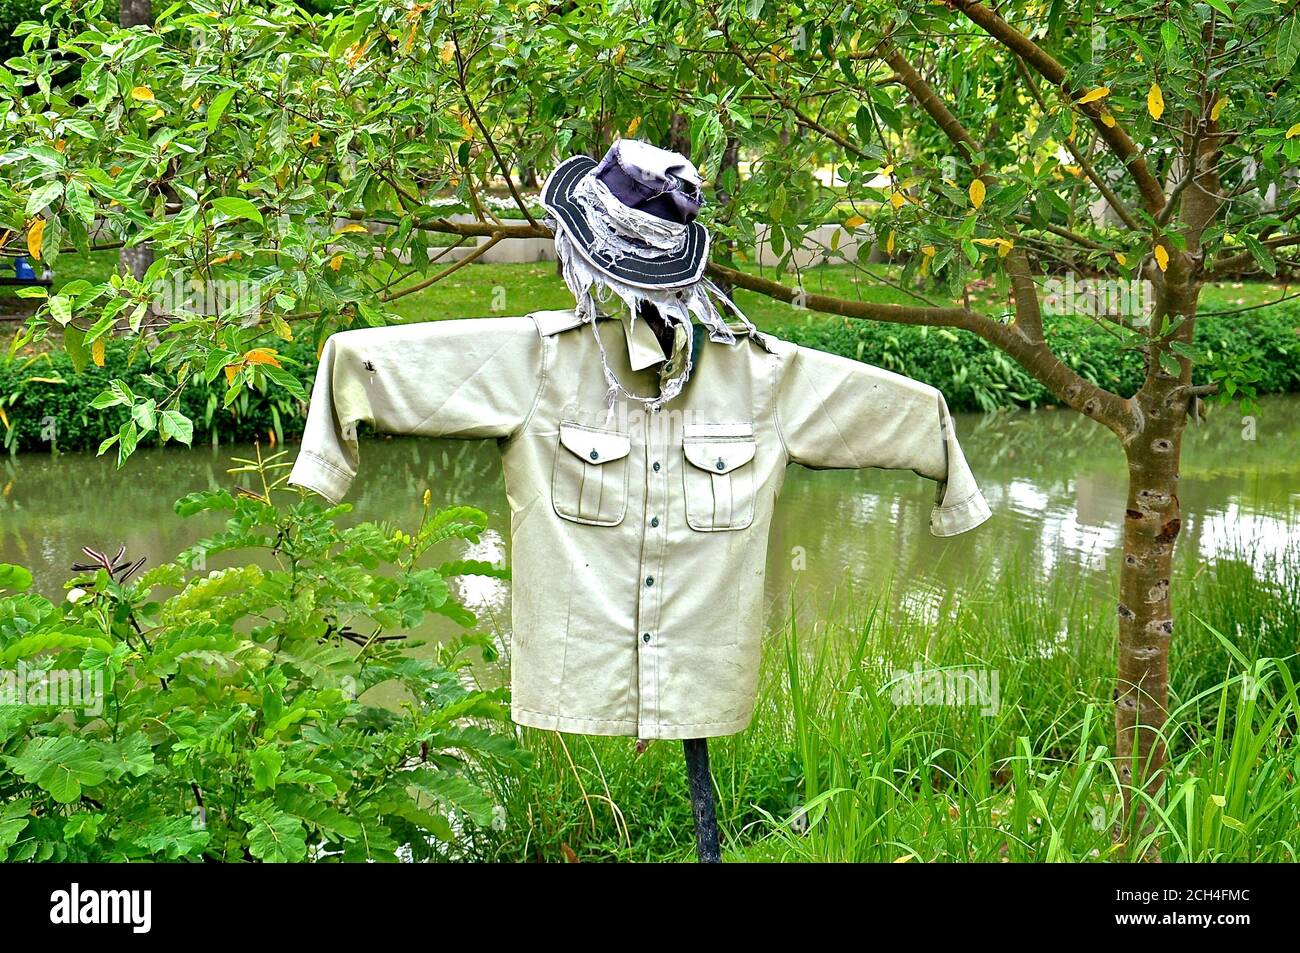 A scarecrow to frighten away birds, made with a shirt and hat, amongst a background of lush green vegetation. Stock Photo